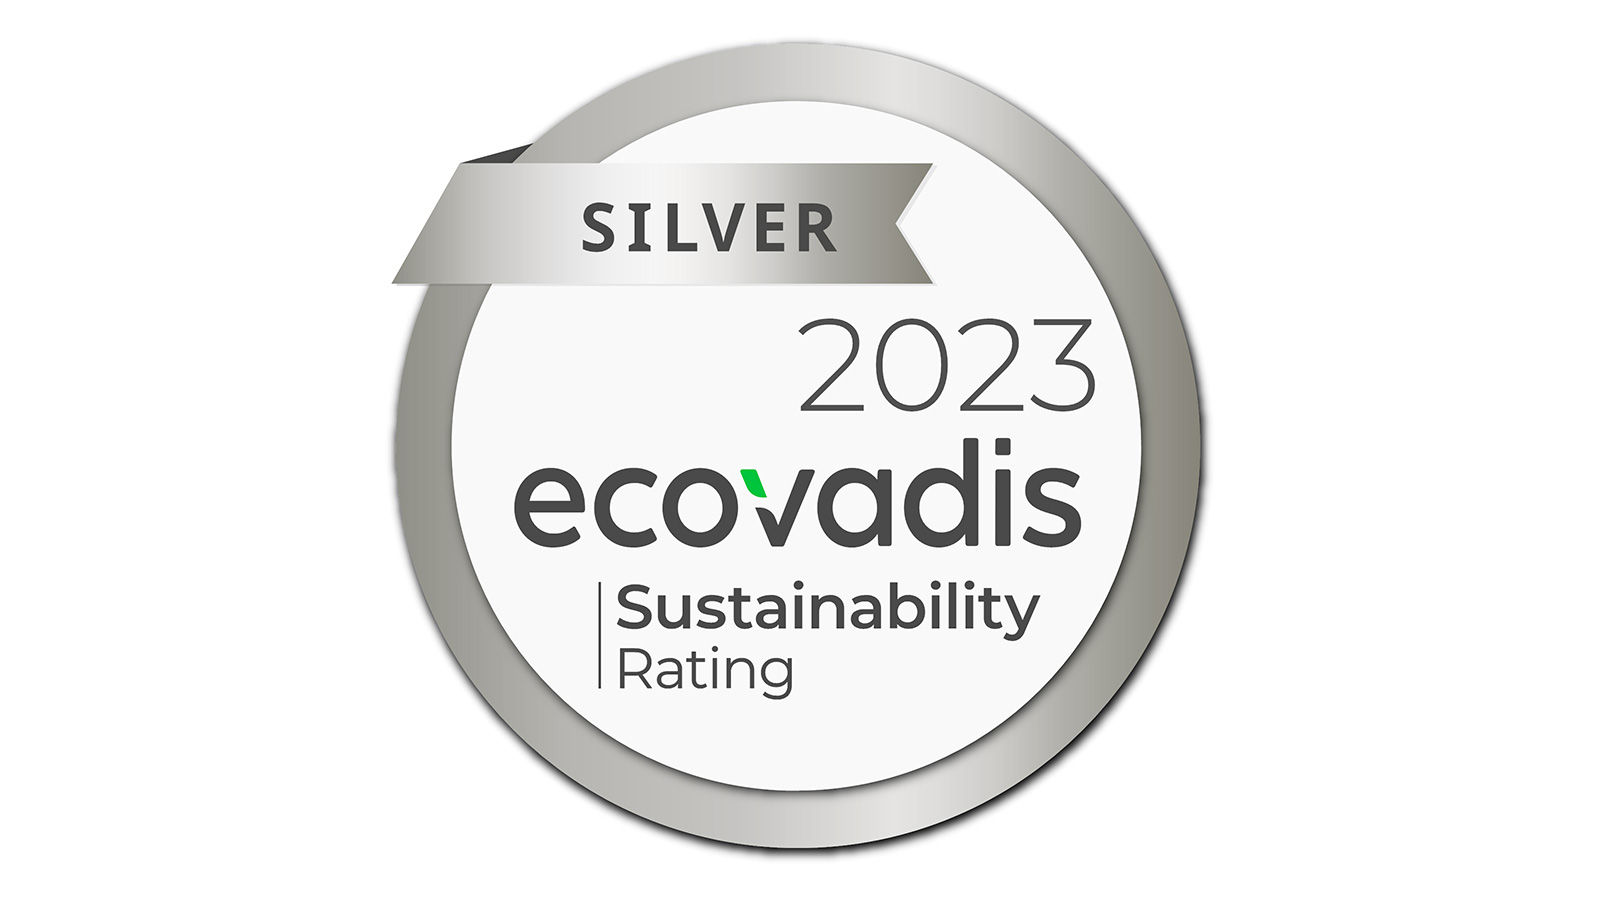 Golden West Packaging earns EcoVadis silver medal for sustainability